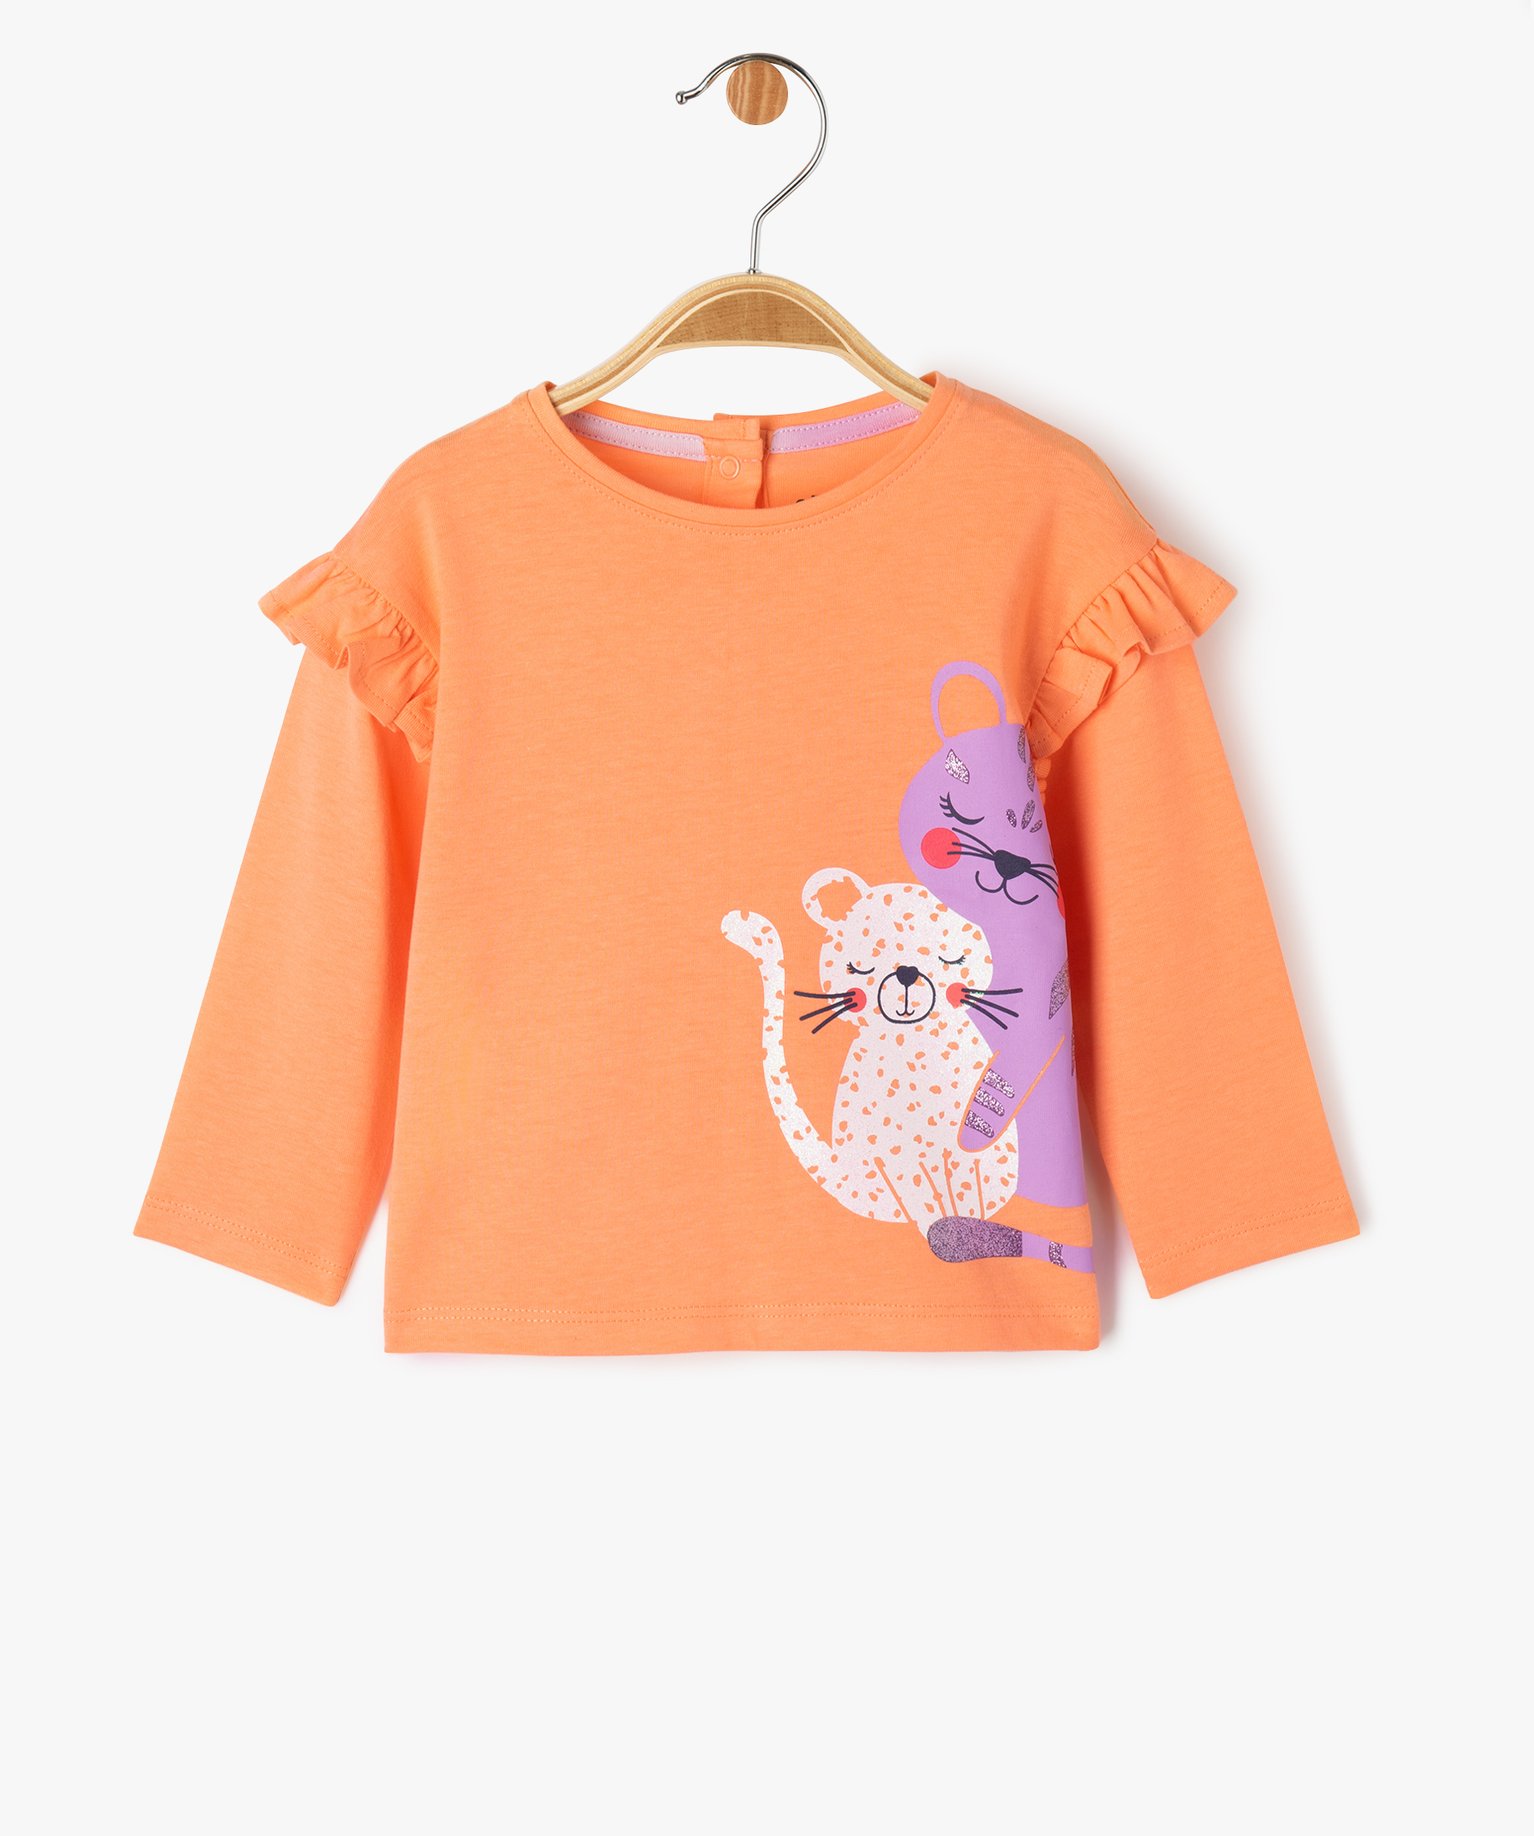 tee-shirt manches longues a volant bebe fille orange